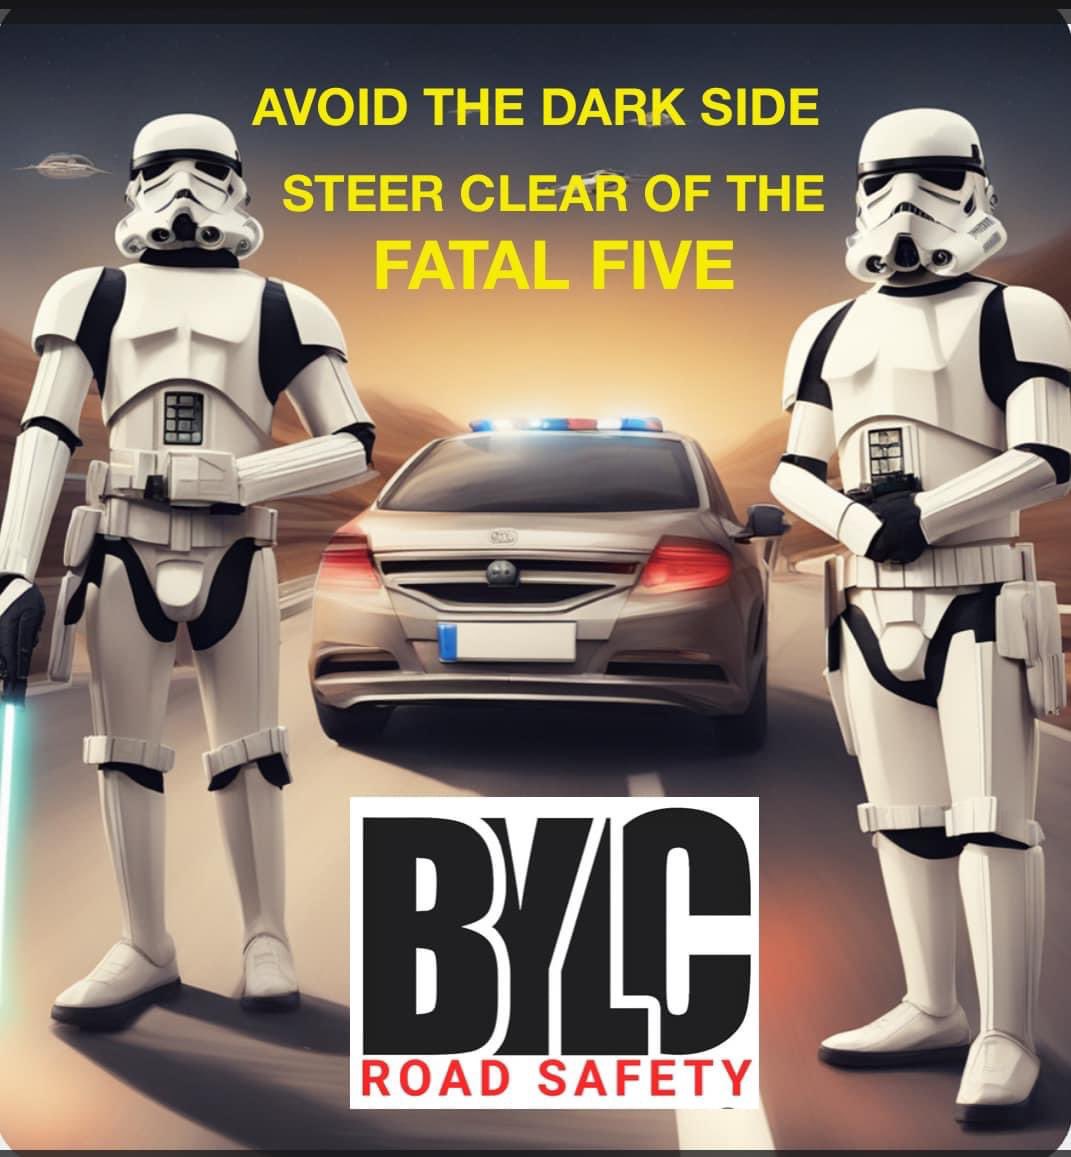 'May the 4th be with you, always... on the roads too! Let's make road safety a force to be reckoned with. Avoid the #Fatal5 and may the road ahead be clear and safe. #MayThe4th #RoadSafety #StaySafe'